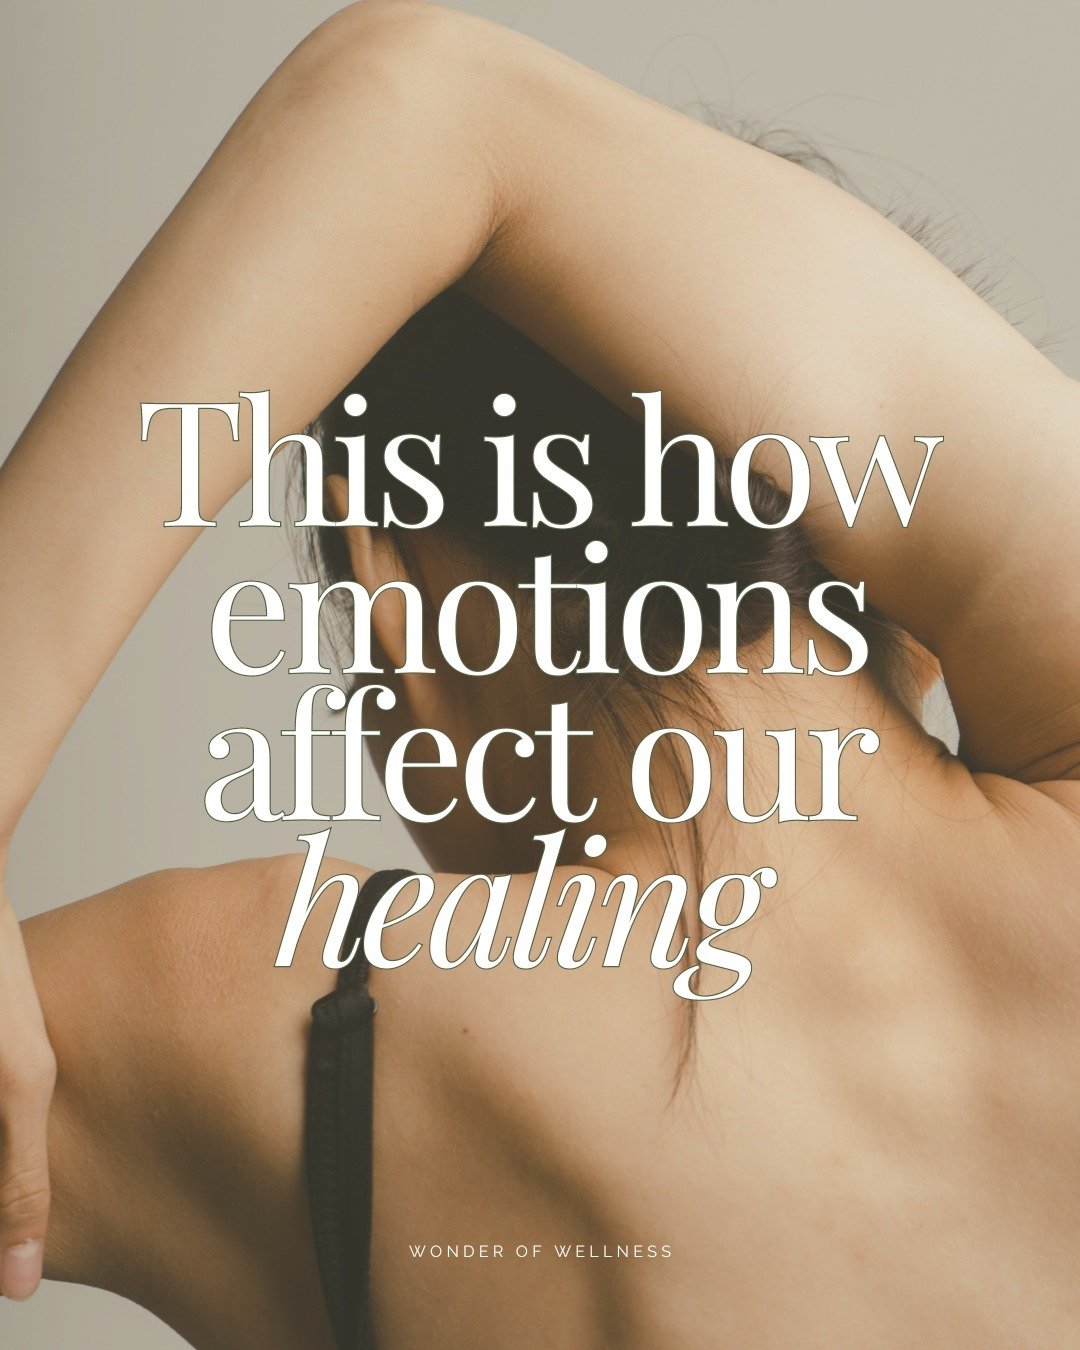 Emotion is energy in motion.

When we're angry heat rises, and our shoulders and arms want to move kinaesthetically. If we're in a low mood, we can have shrugged shoulders and a slumped spine. 

Our feelings create vibrations within us, shaping how w